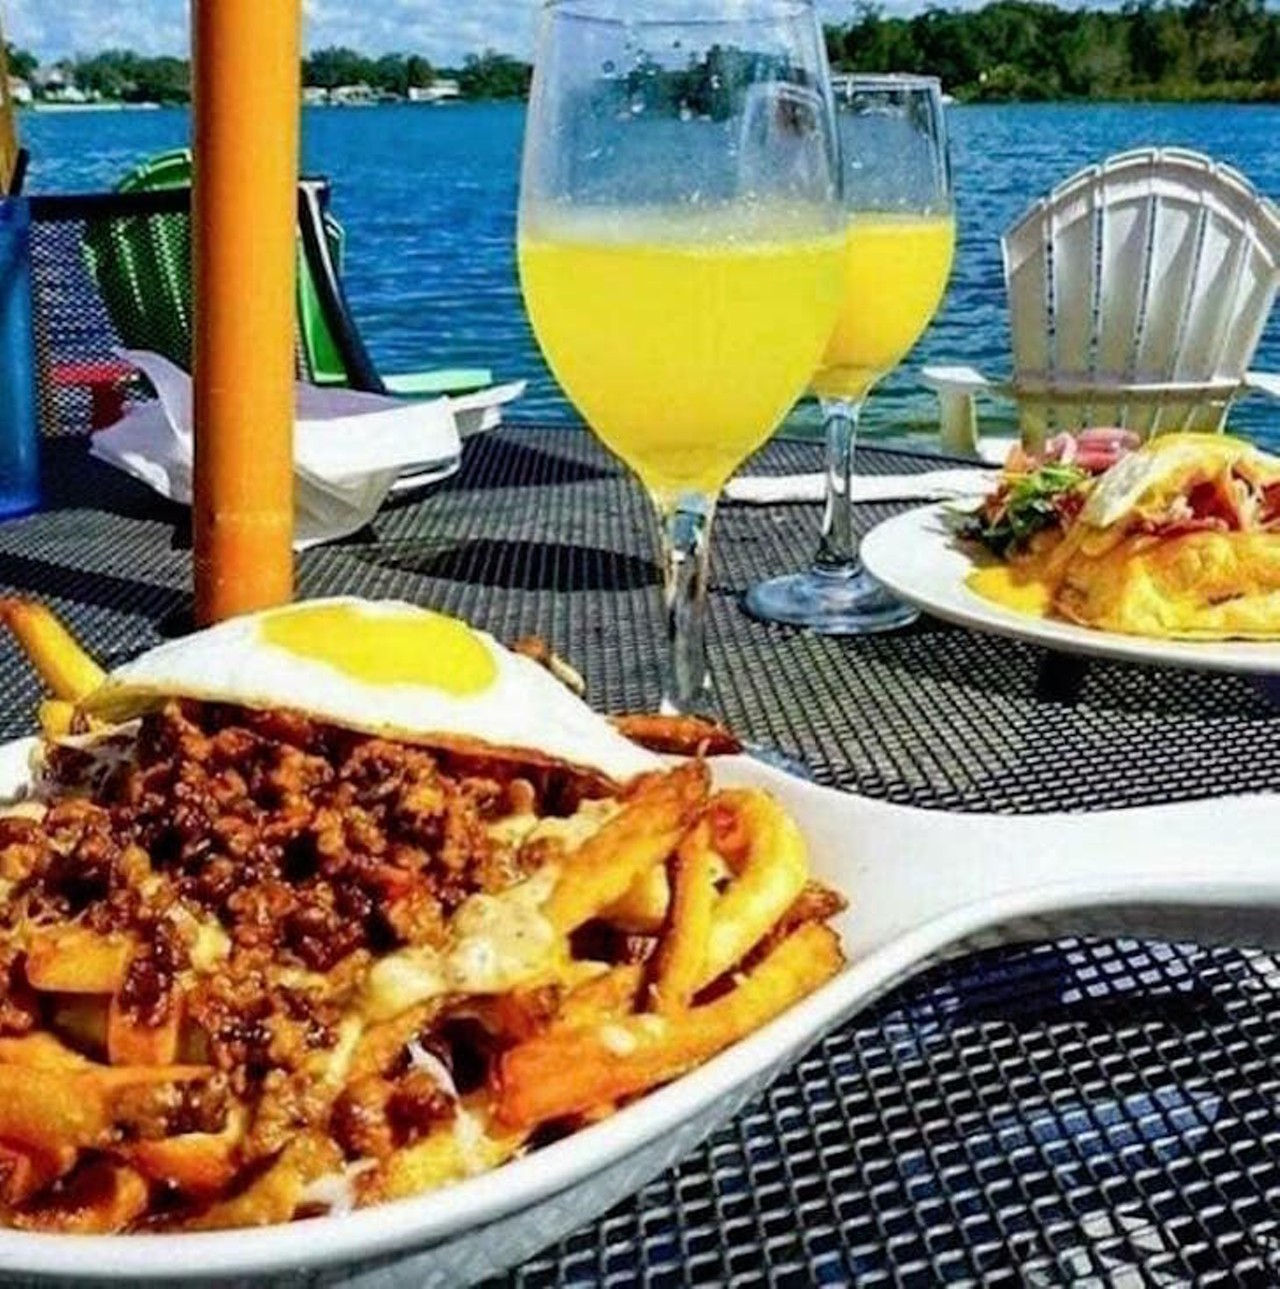 The Waterfront  
4201 S. Orange Ave., 407-866-0468
Have your brunch with a water view. The beautiful scenery goes great with bottomless mimosas. They&#146;re $14.95 and brunch is served Saturdays and Sundays from 11a.m. to 3 p.m.
Photo via Facebook/The Waterfront